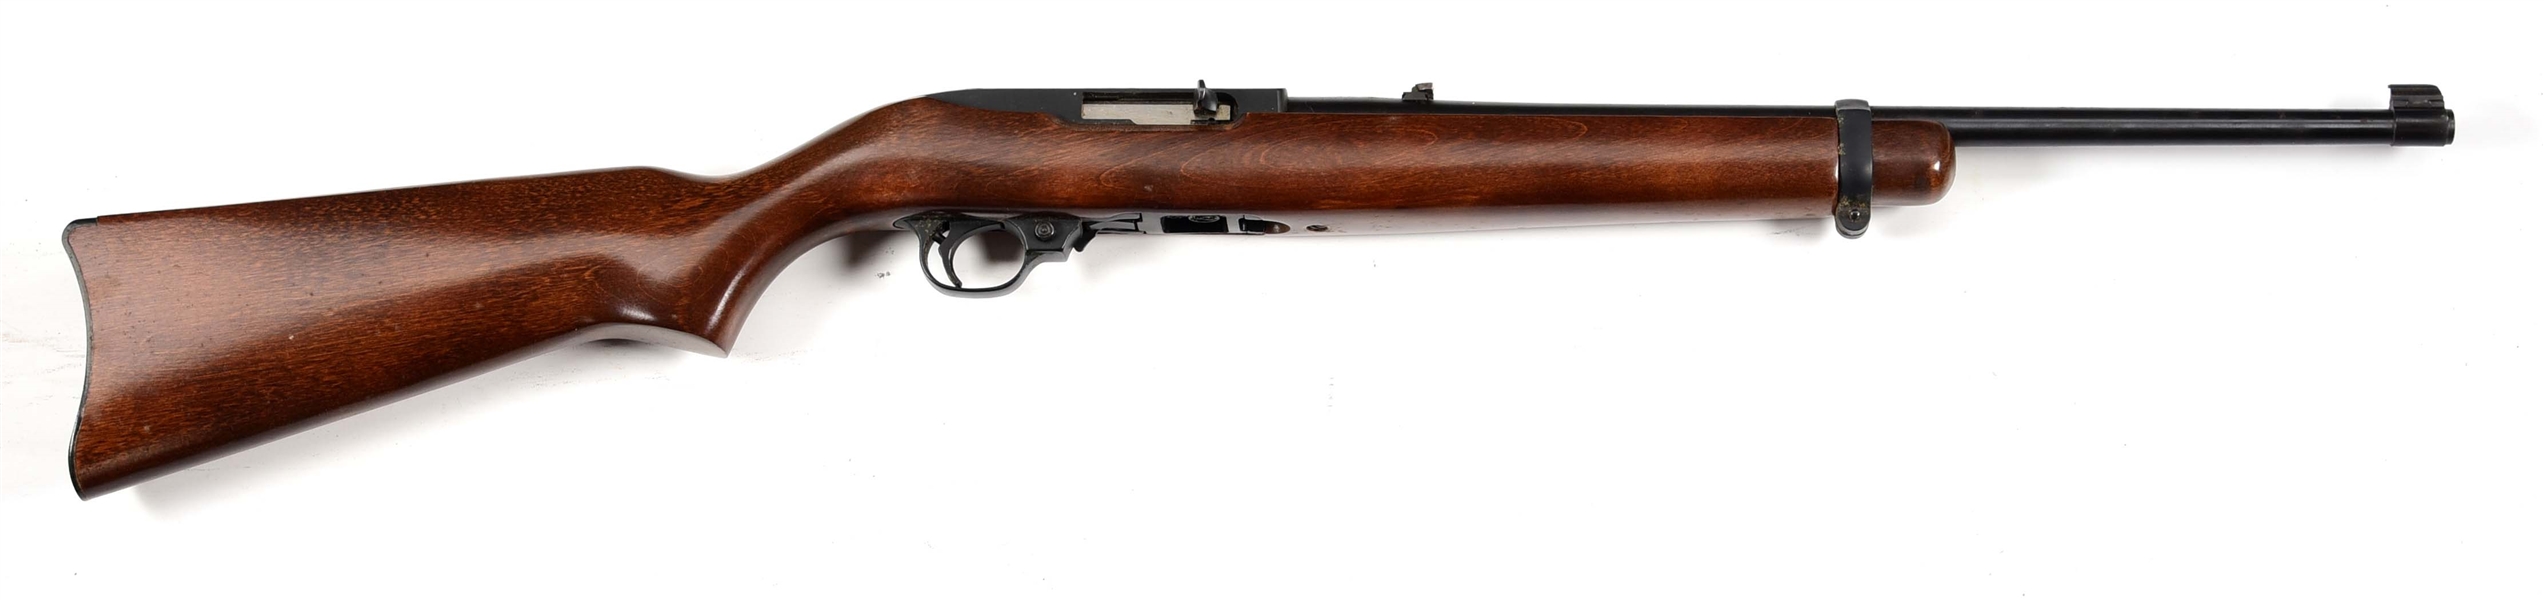 (M) RUGER 10/22 SEMI-AUTOMATIC RIFLE